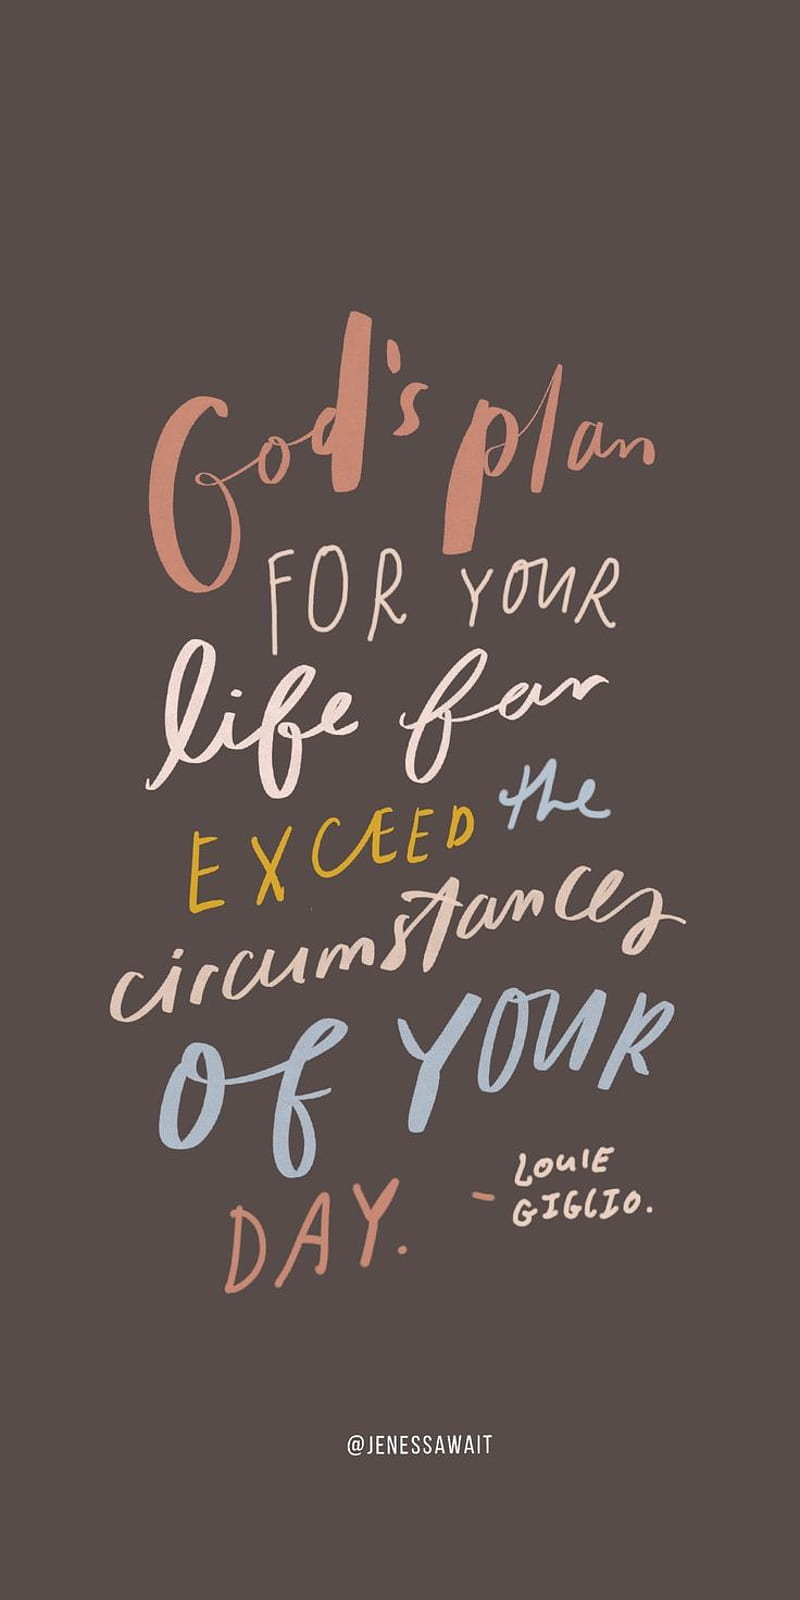 Gods plan, christian, cute christian, inspiration, luvujesus, positive, quotes, sayings, thank, up, HD phone wallpaper